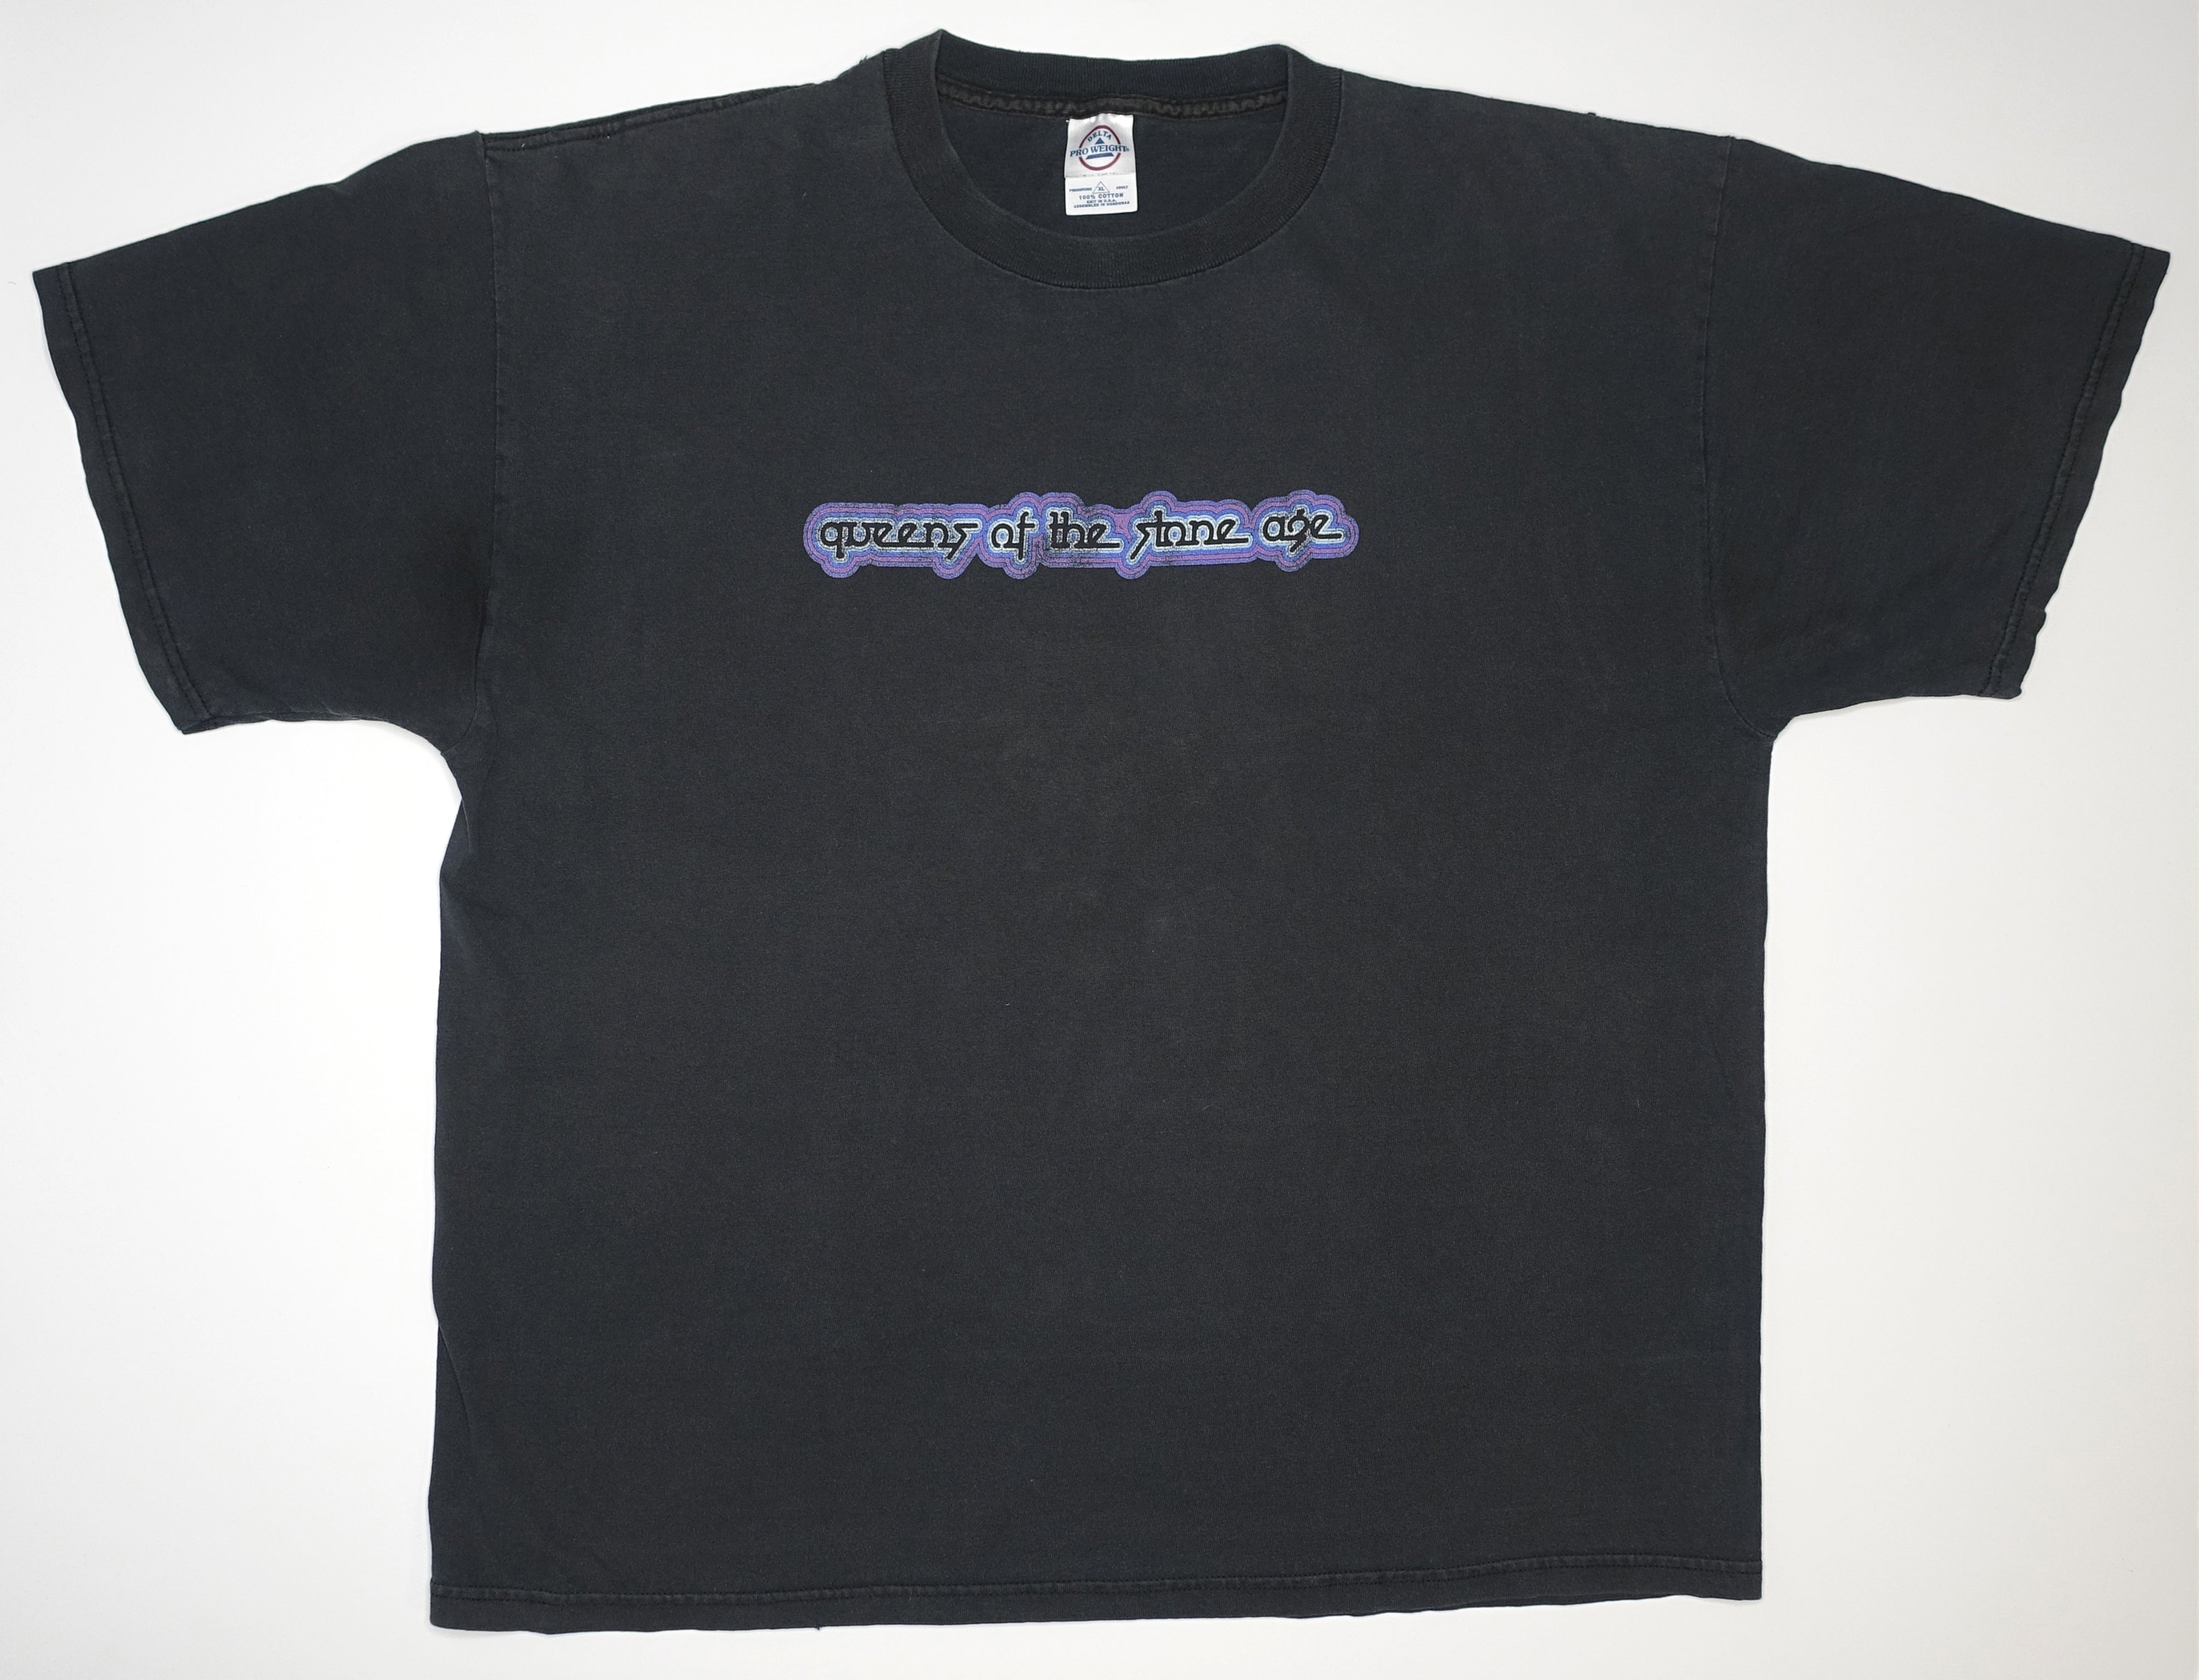 Queens Of The Stone Age – S/T Purple Logo 90's Tour Shirt Size XL